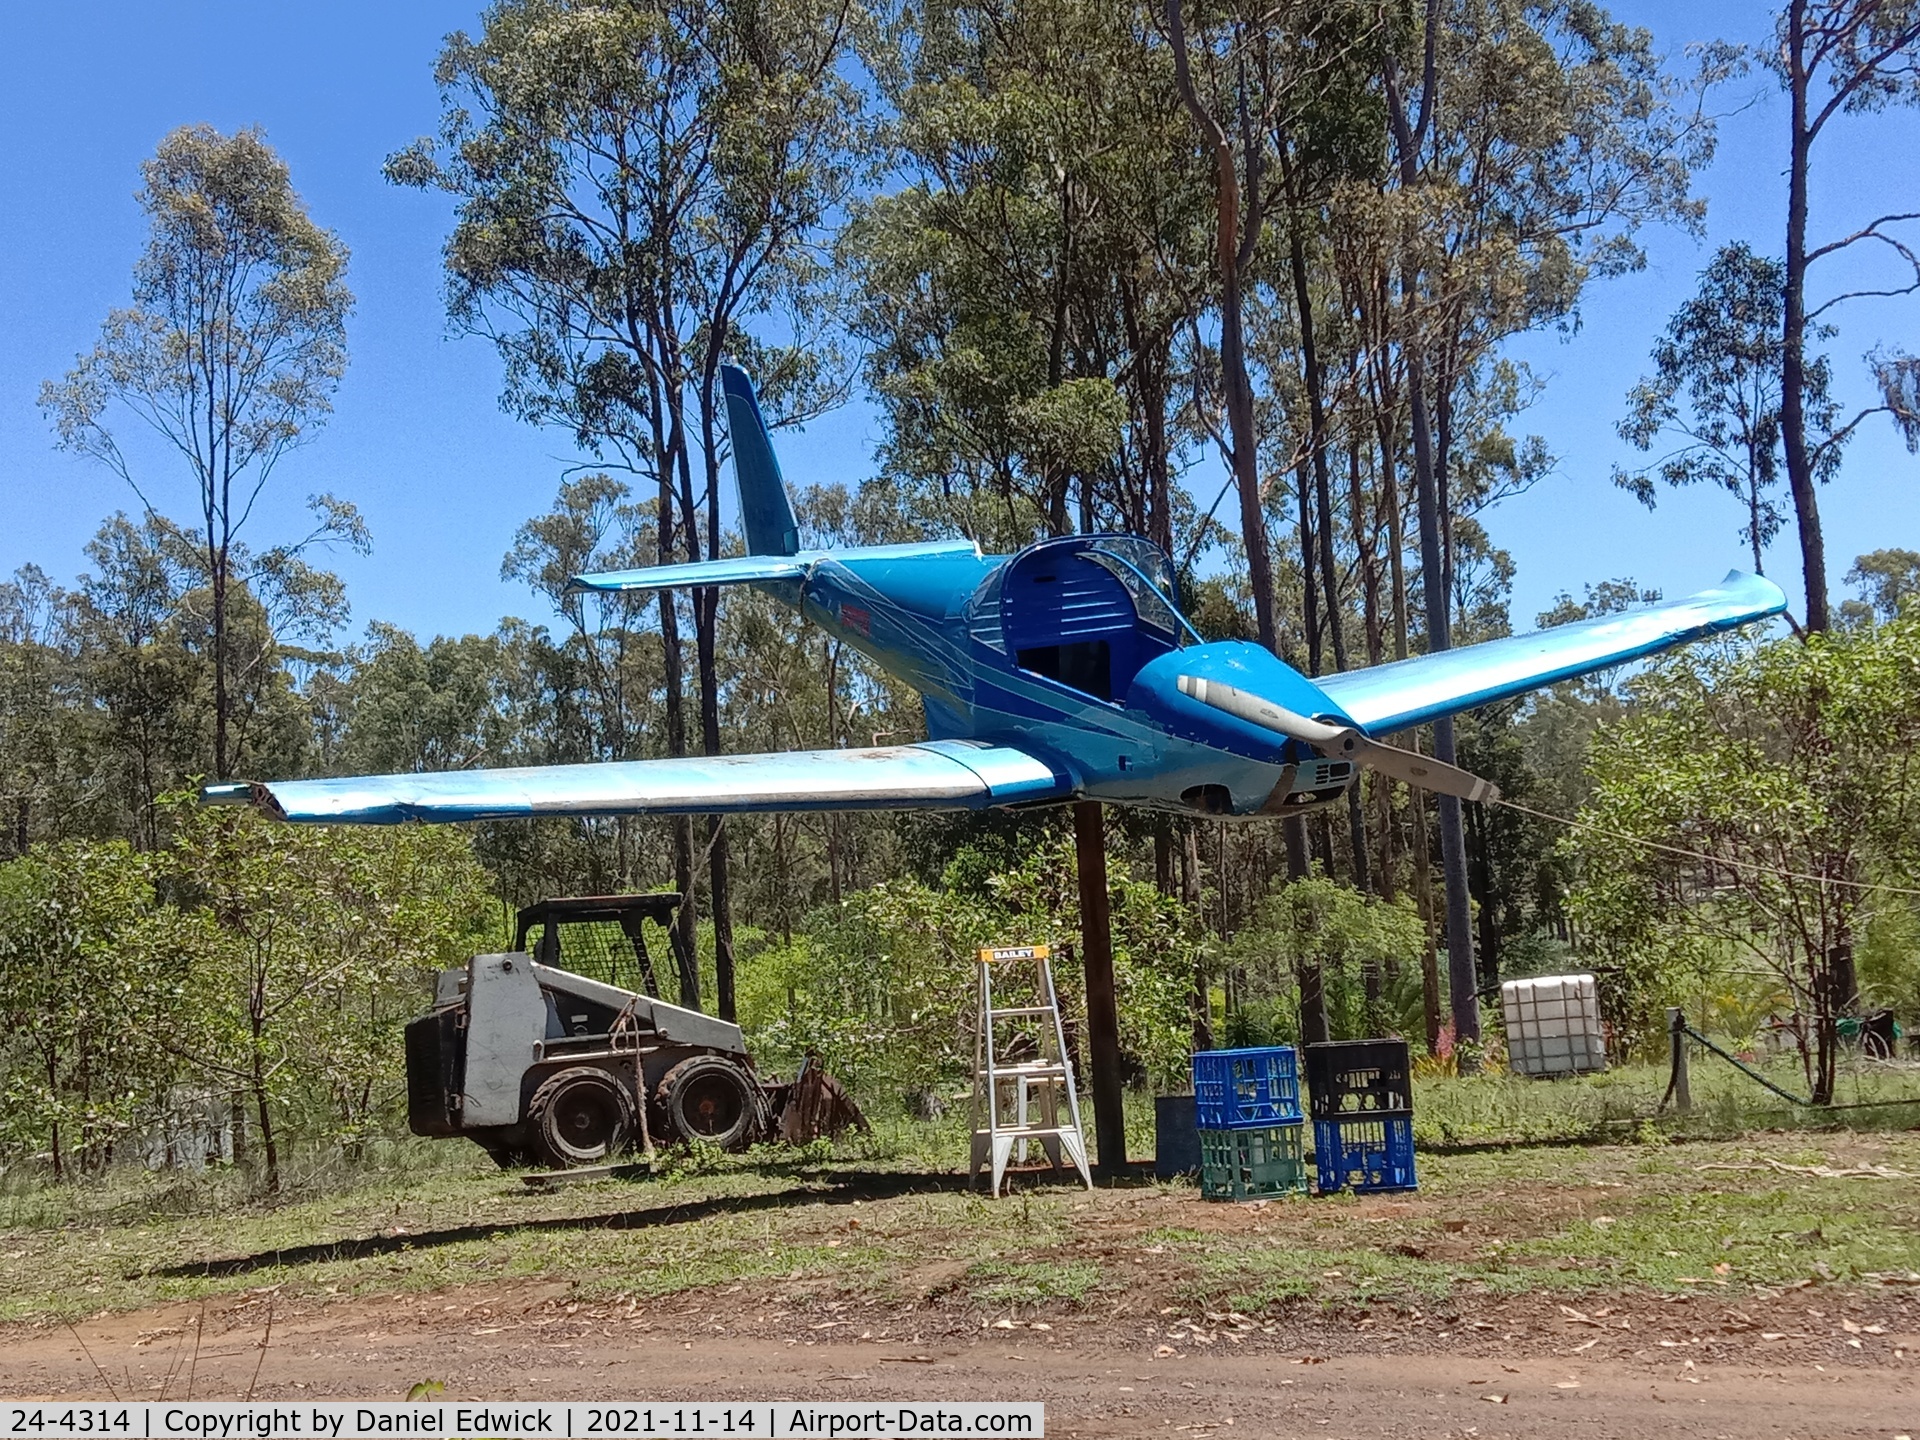 24-4314, 2005 Sabre RVX-115 C/N 5105125k, Plane was crashed and stripped for parts 
It now rests as a garden orniment in Glenwood qld